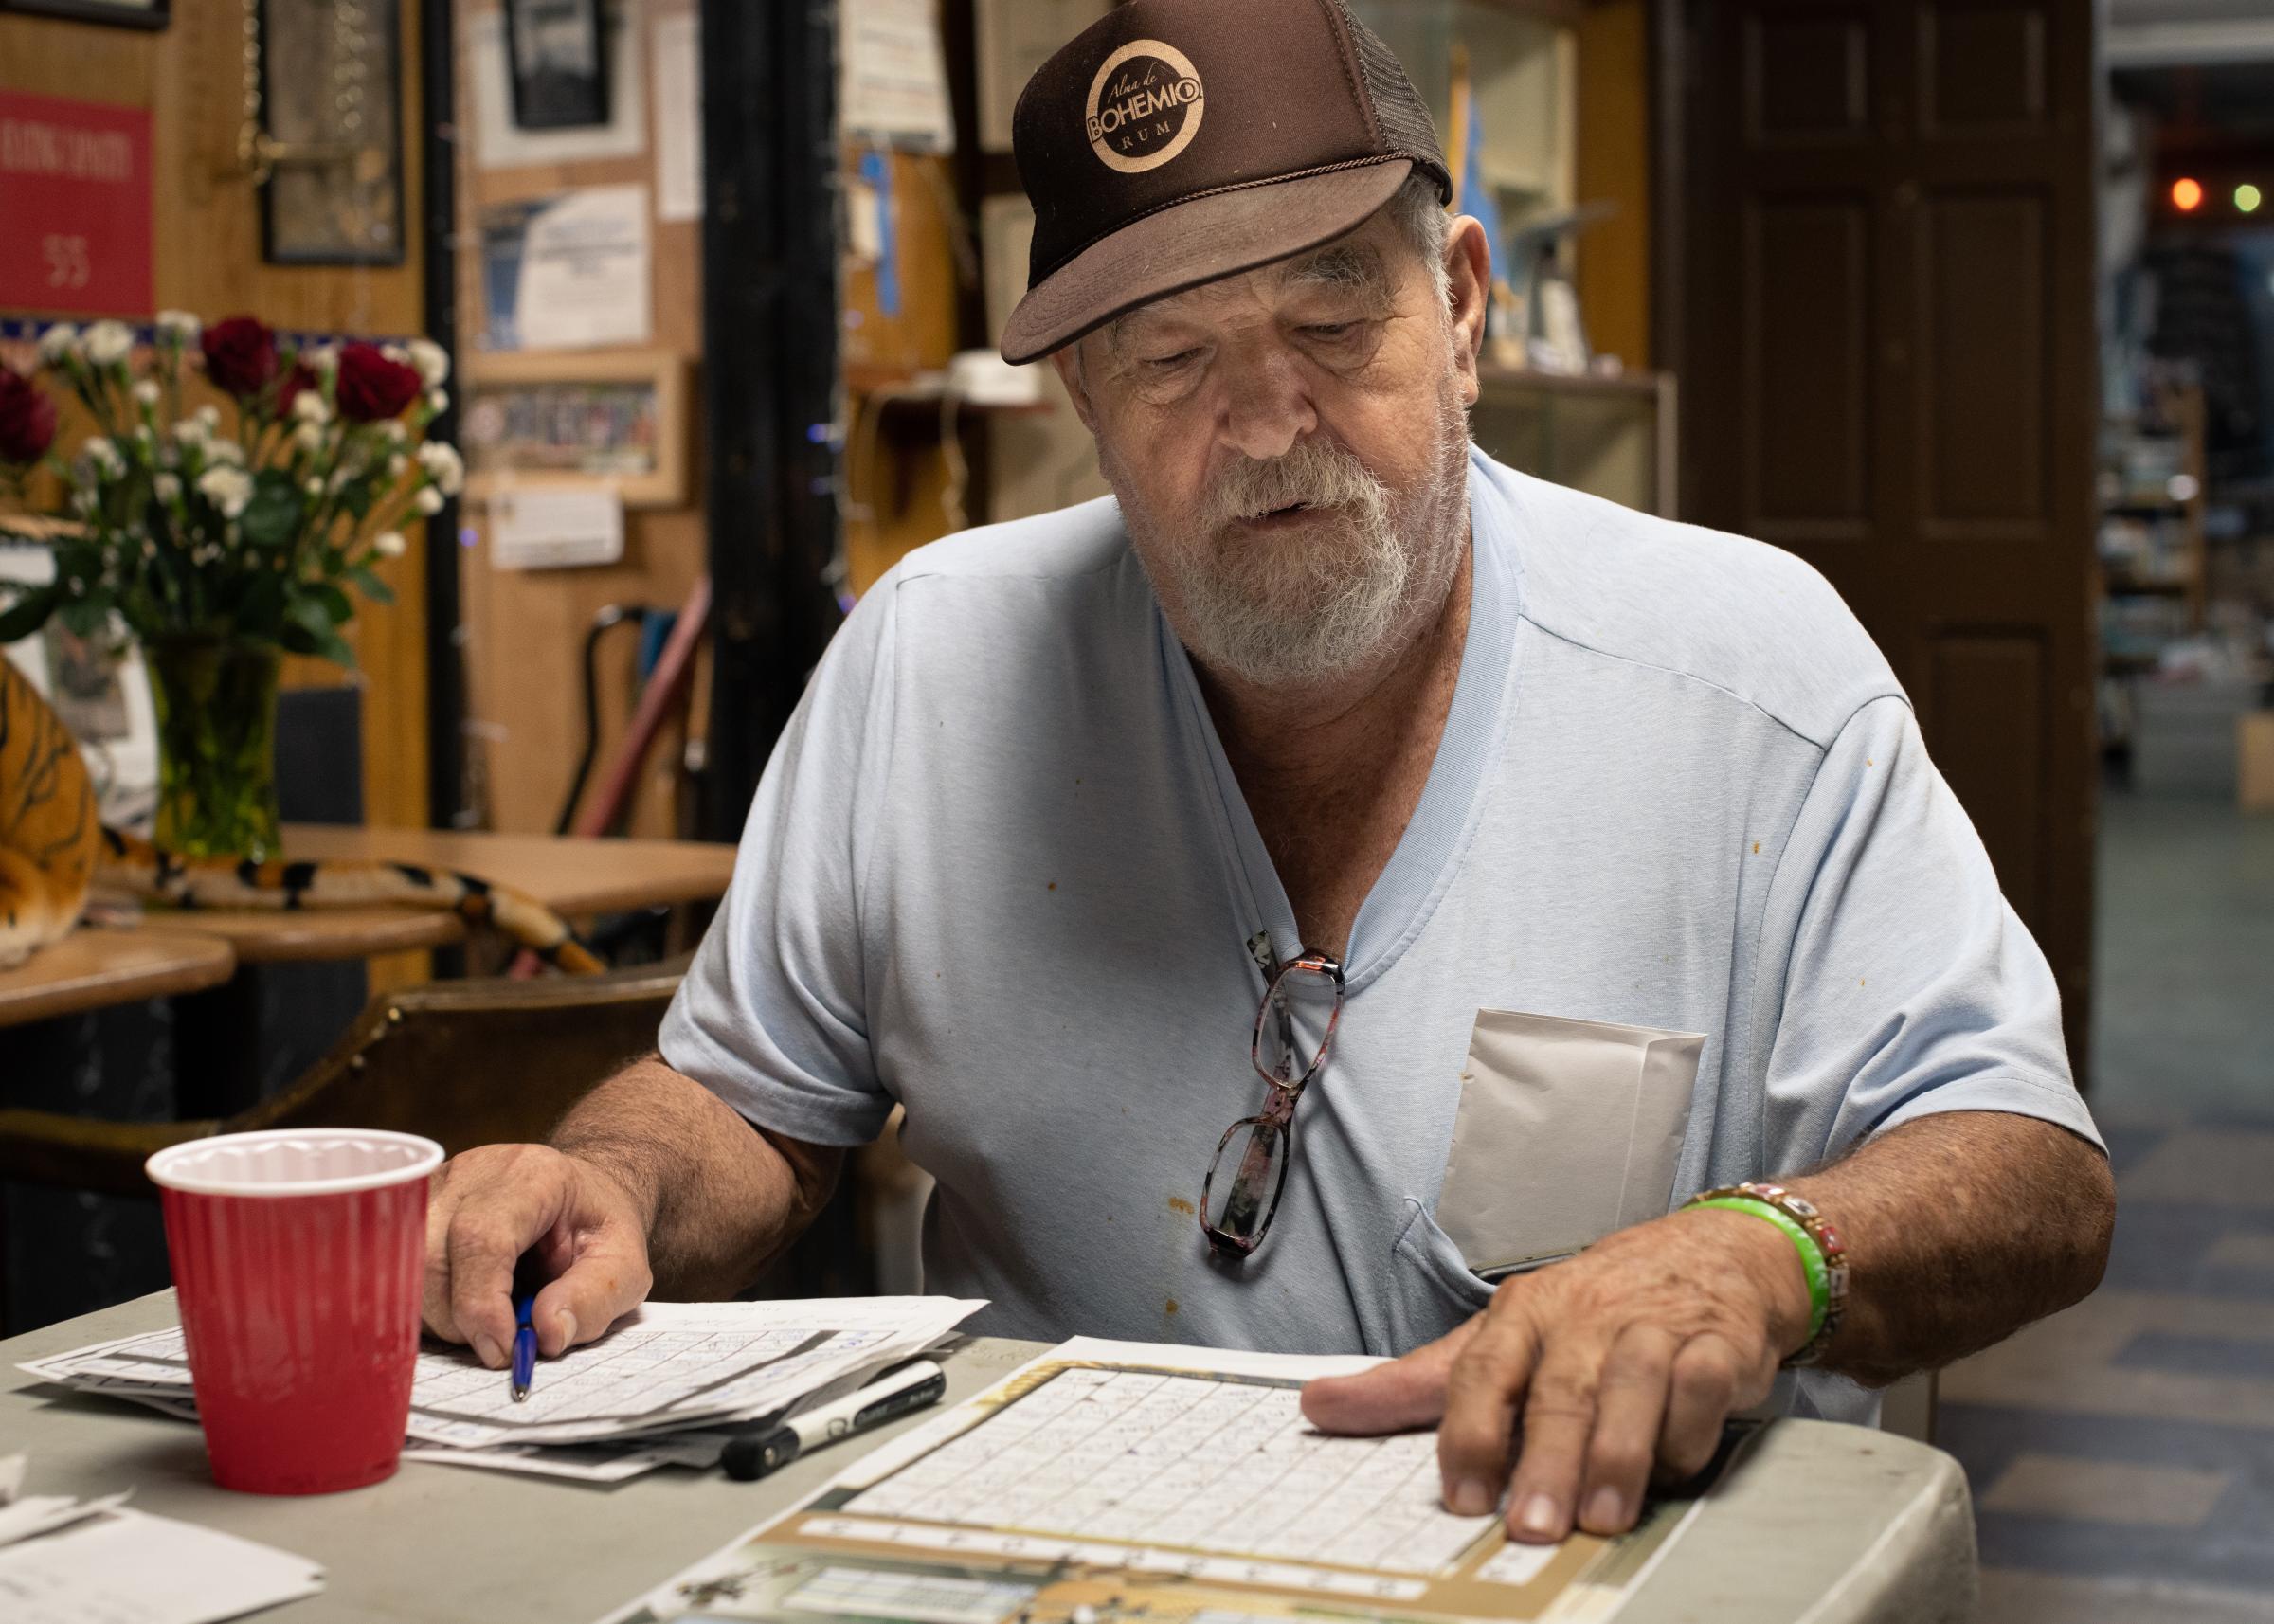 Post 67: American Legion, American Stories - Richard Izzi, the longtime post Commander, is meticulously reviewing the numerous super bowl bet...